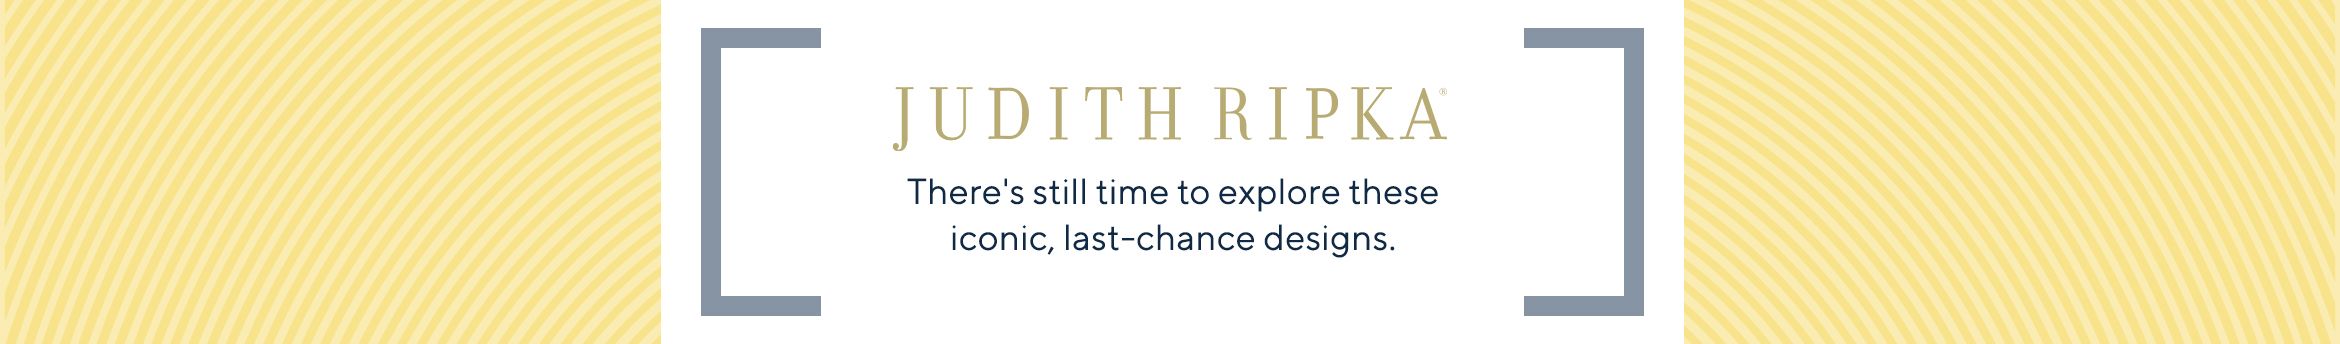 Judith Ripka - There's still time to explore these iconic, last-chance designs.